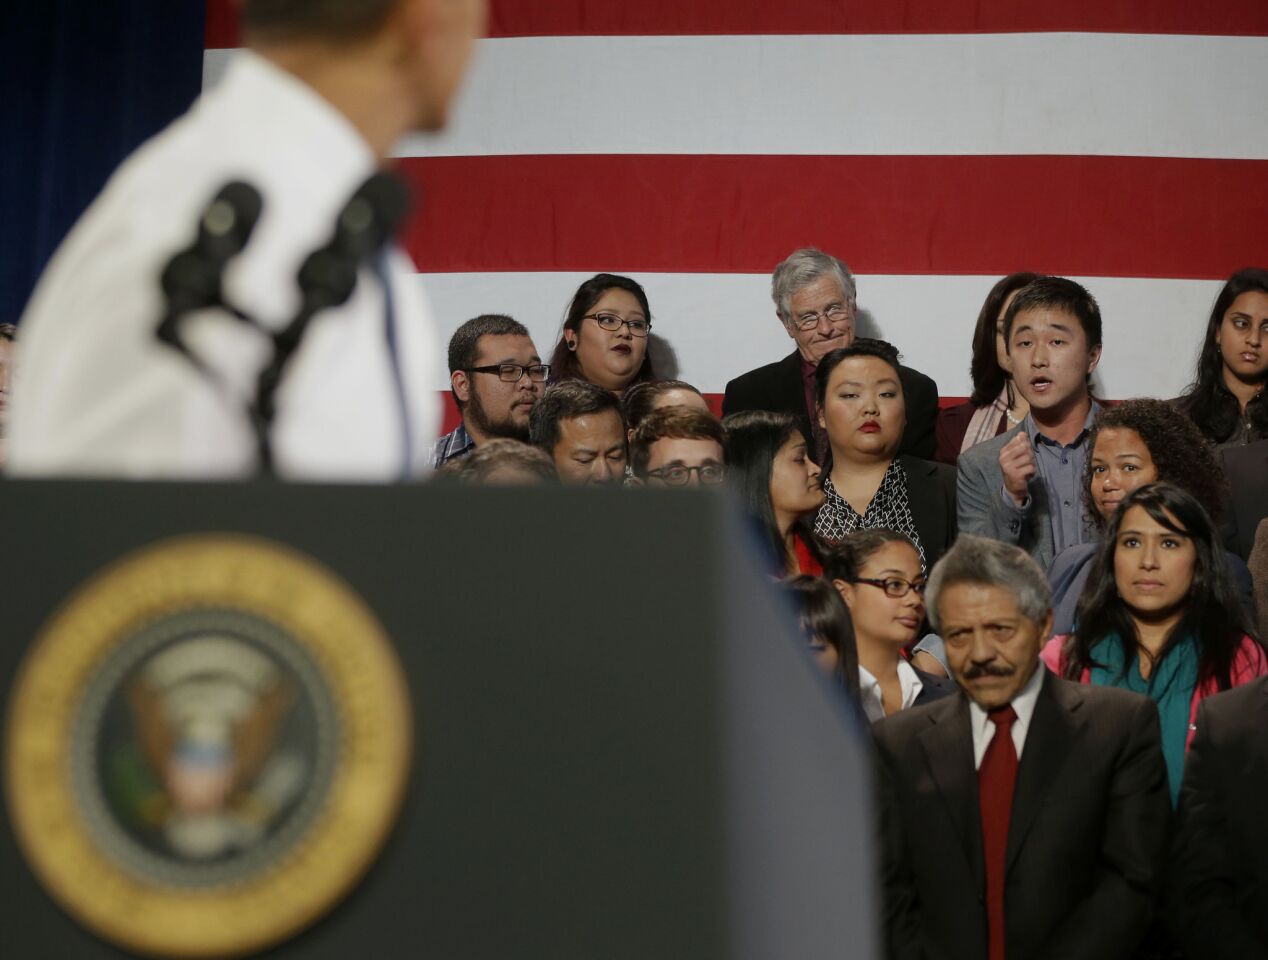 President Obama turns around to respond to a man who was heckling him about anti-deportation policies.